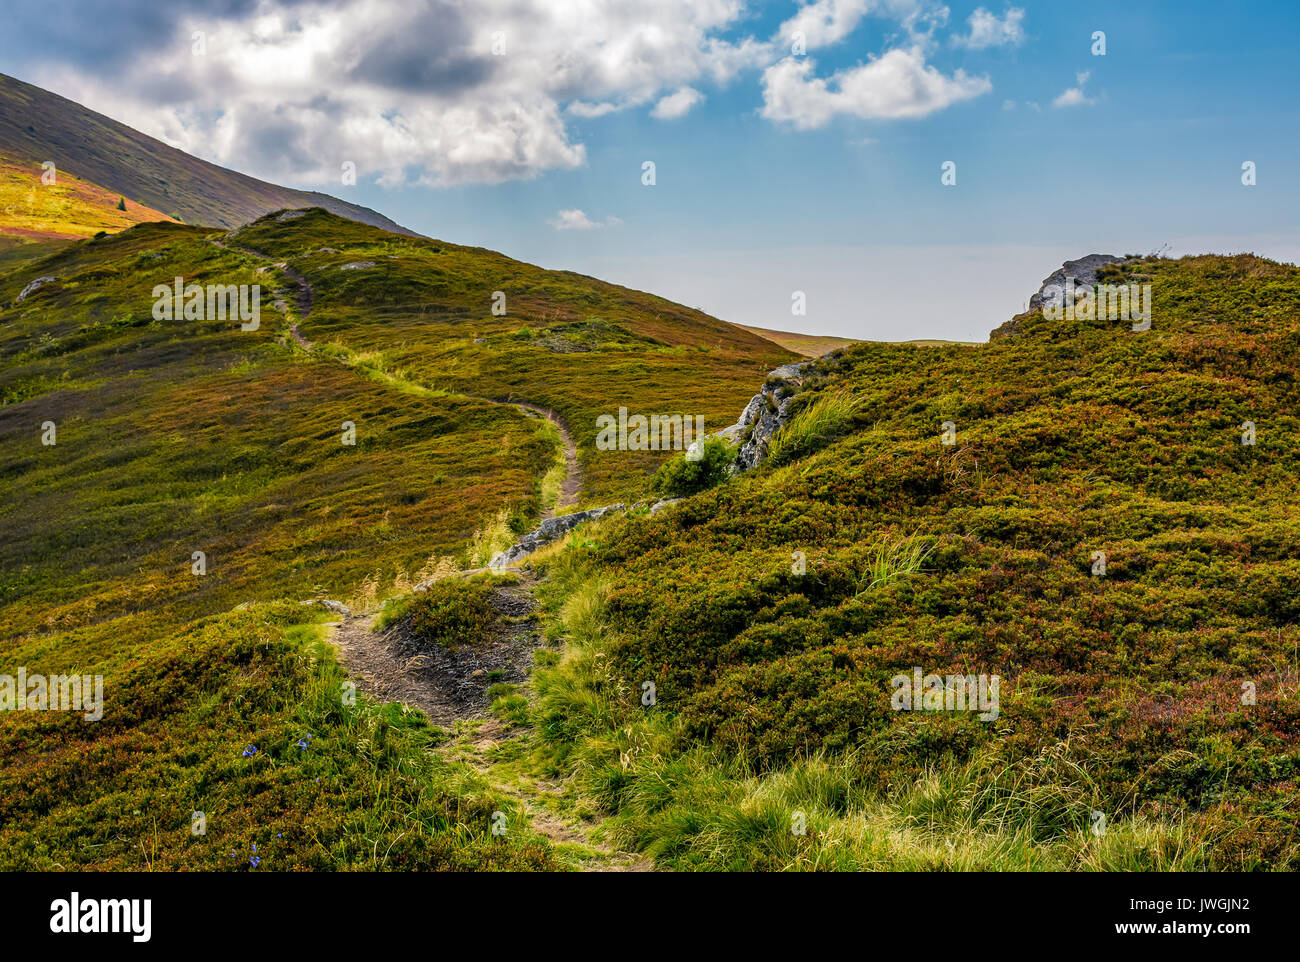 tourists curve path up the hill to the top. beautiful grassy mountain meadows with rocks on humps Stock Photo